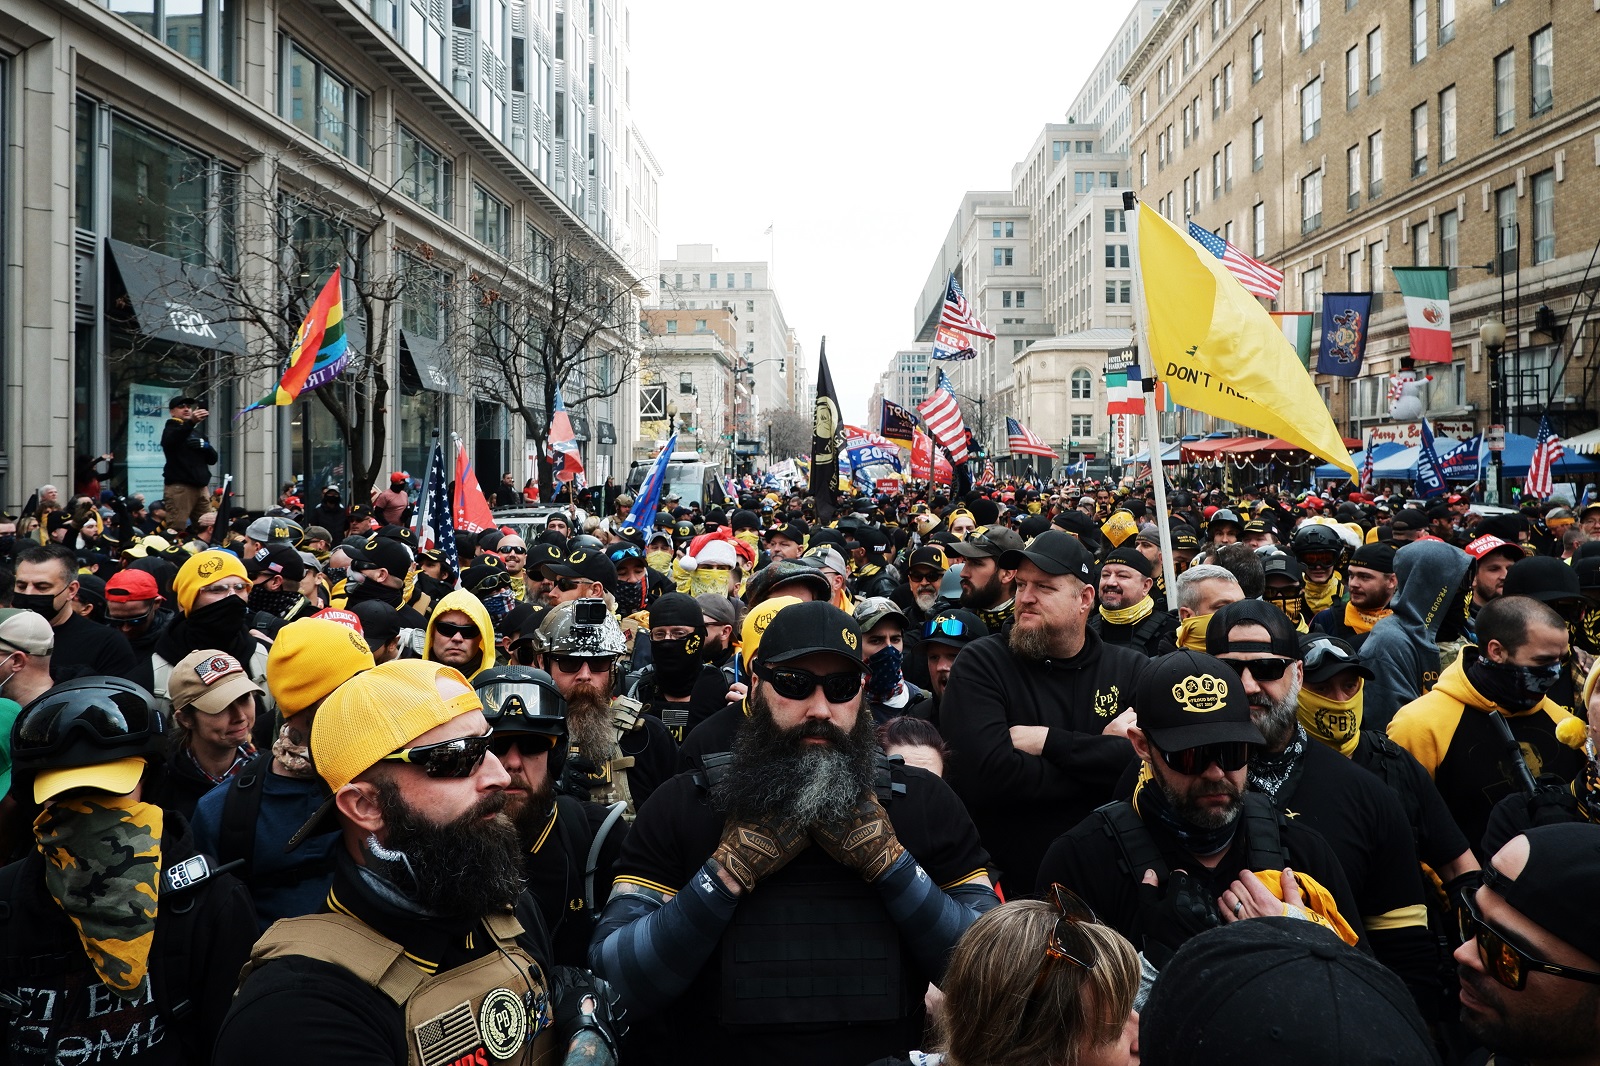 epa08880120 Members of the far-right group the Proud Boys gather in E street northwest before marching into Freedom Plaza, in Washington, DC, USA, 12 December 2020. Supporters of US President Donald J. Trump are gathering in Washington DC as part of the 'Million MAGA March' to support the President's baseless claims of voter fraud in the 2020 election.  EPA/GAMAL DIAB